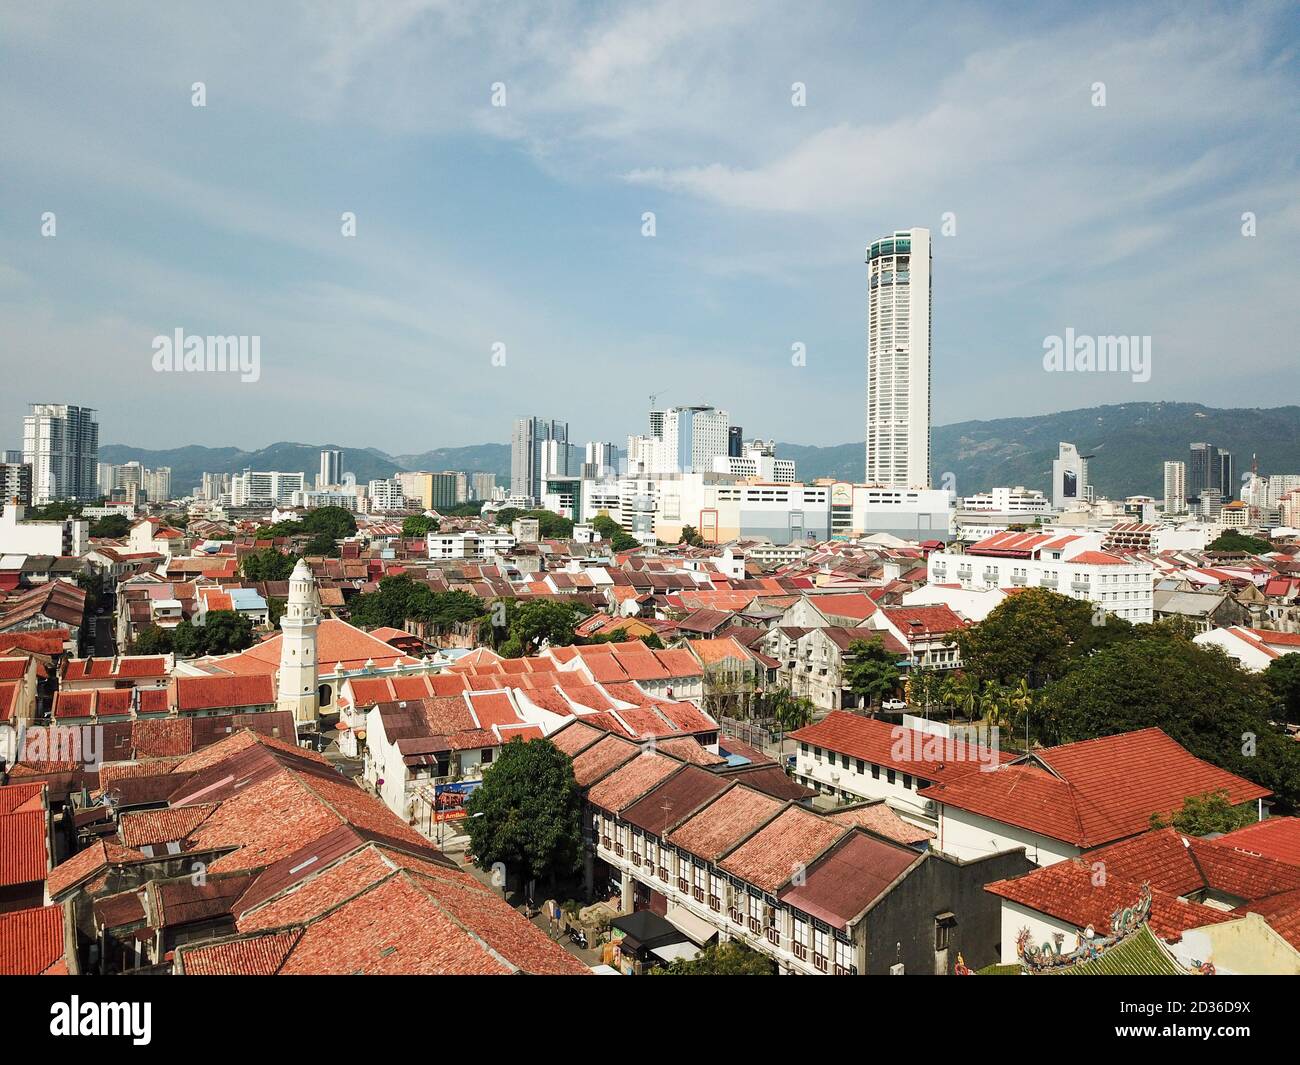 Georgetown, Penang/Malaysia - Mar 17 2020: Aerial view rooftop of old shop heritage house with KOMTAR at back. Stock Photo